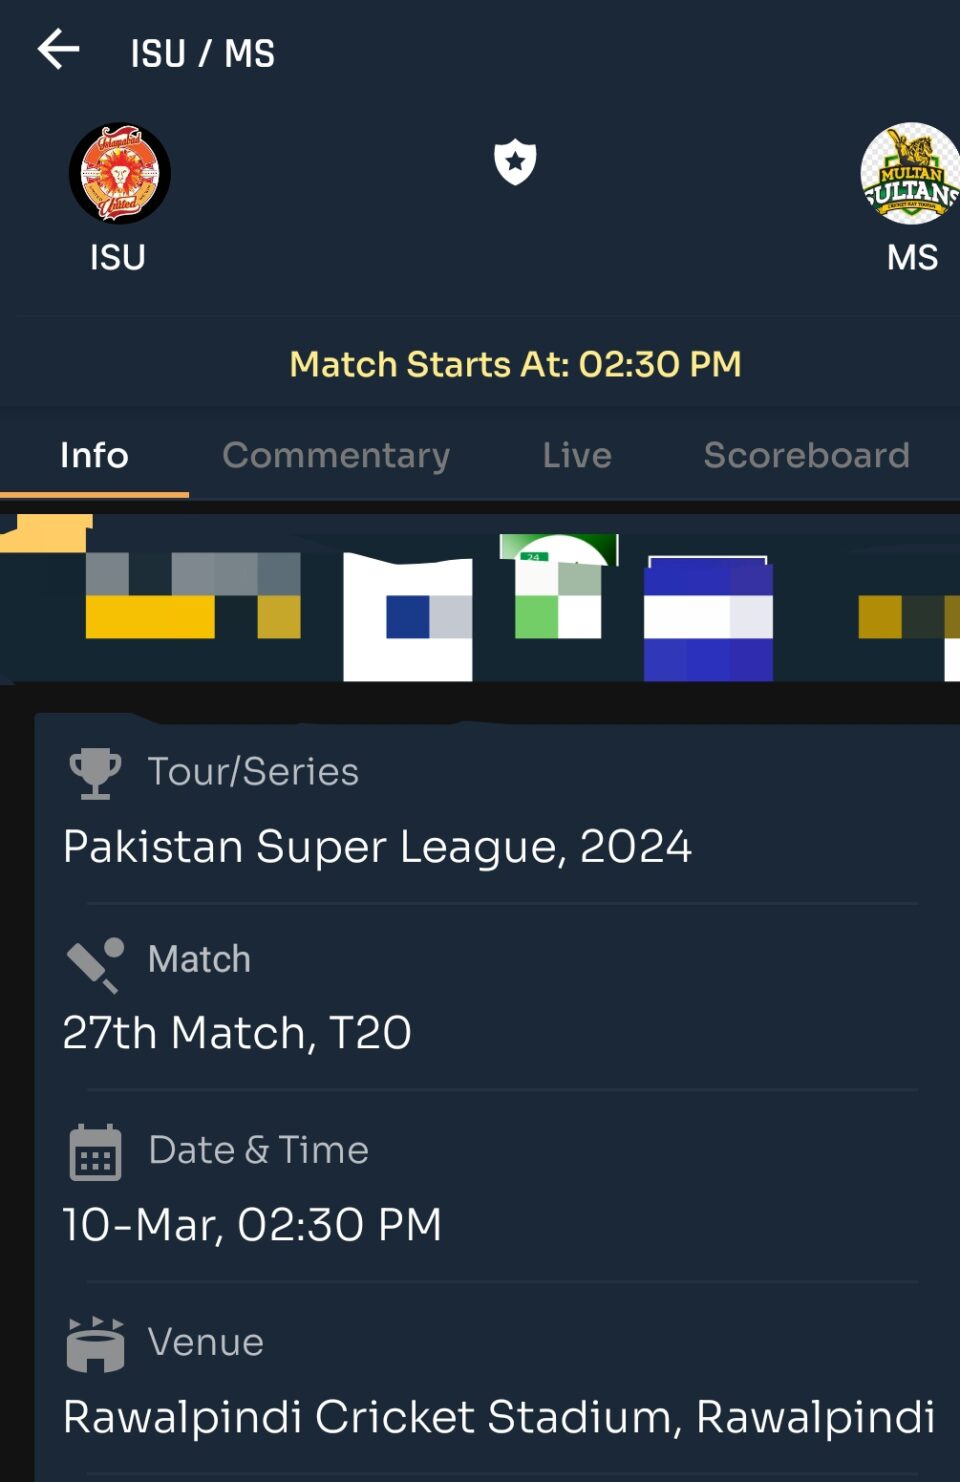 Today psl Match Prediction |Match Number 27|MS vs ISU| Toss and Match Analysis | Pitch & Weather Reports